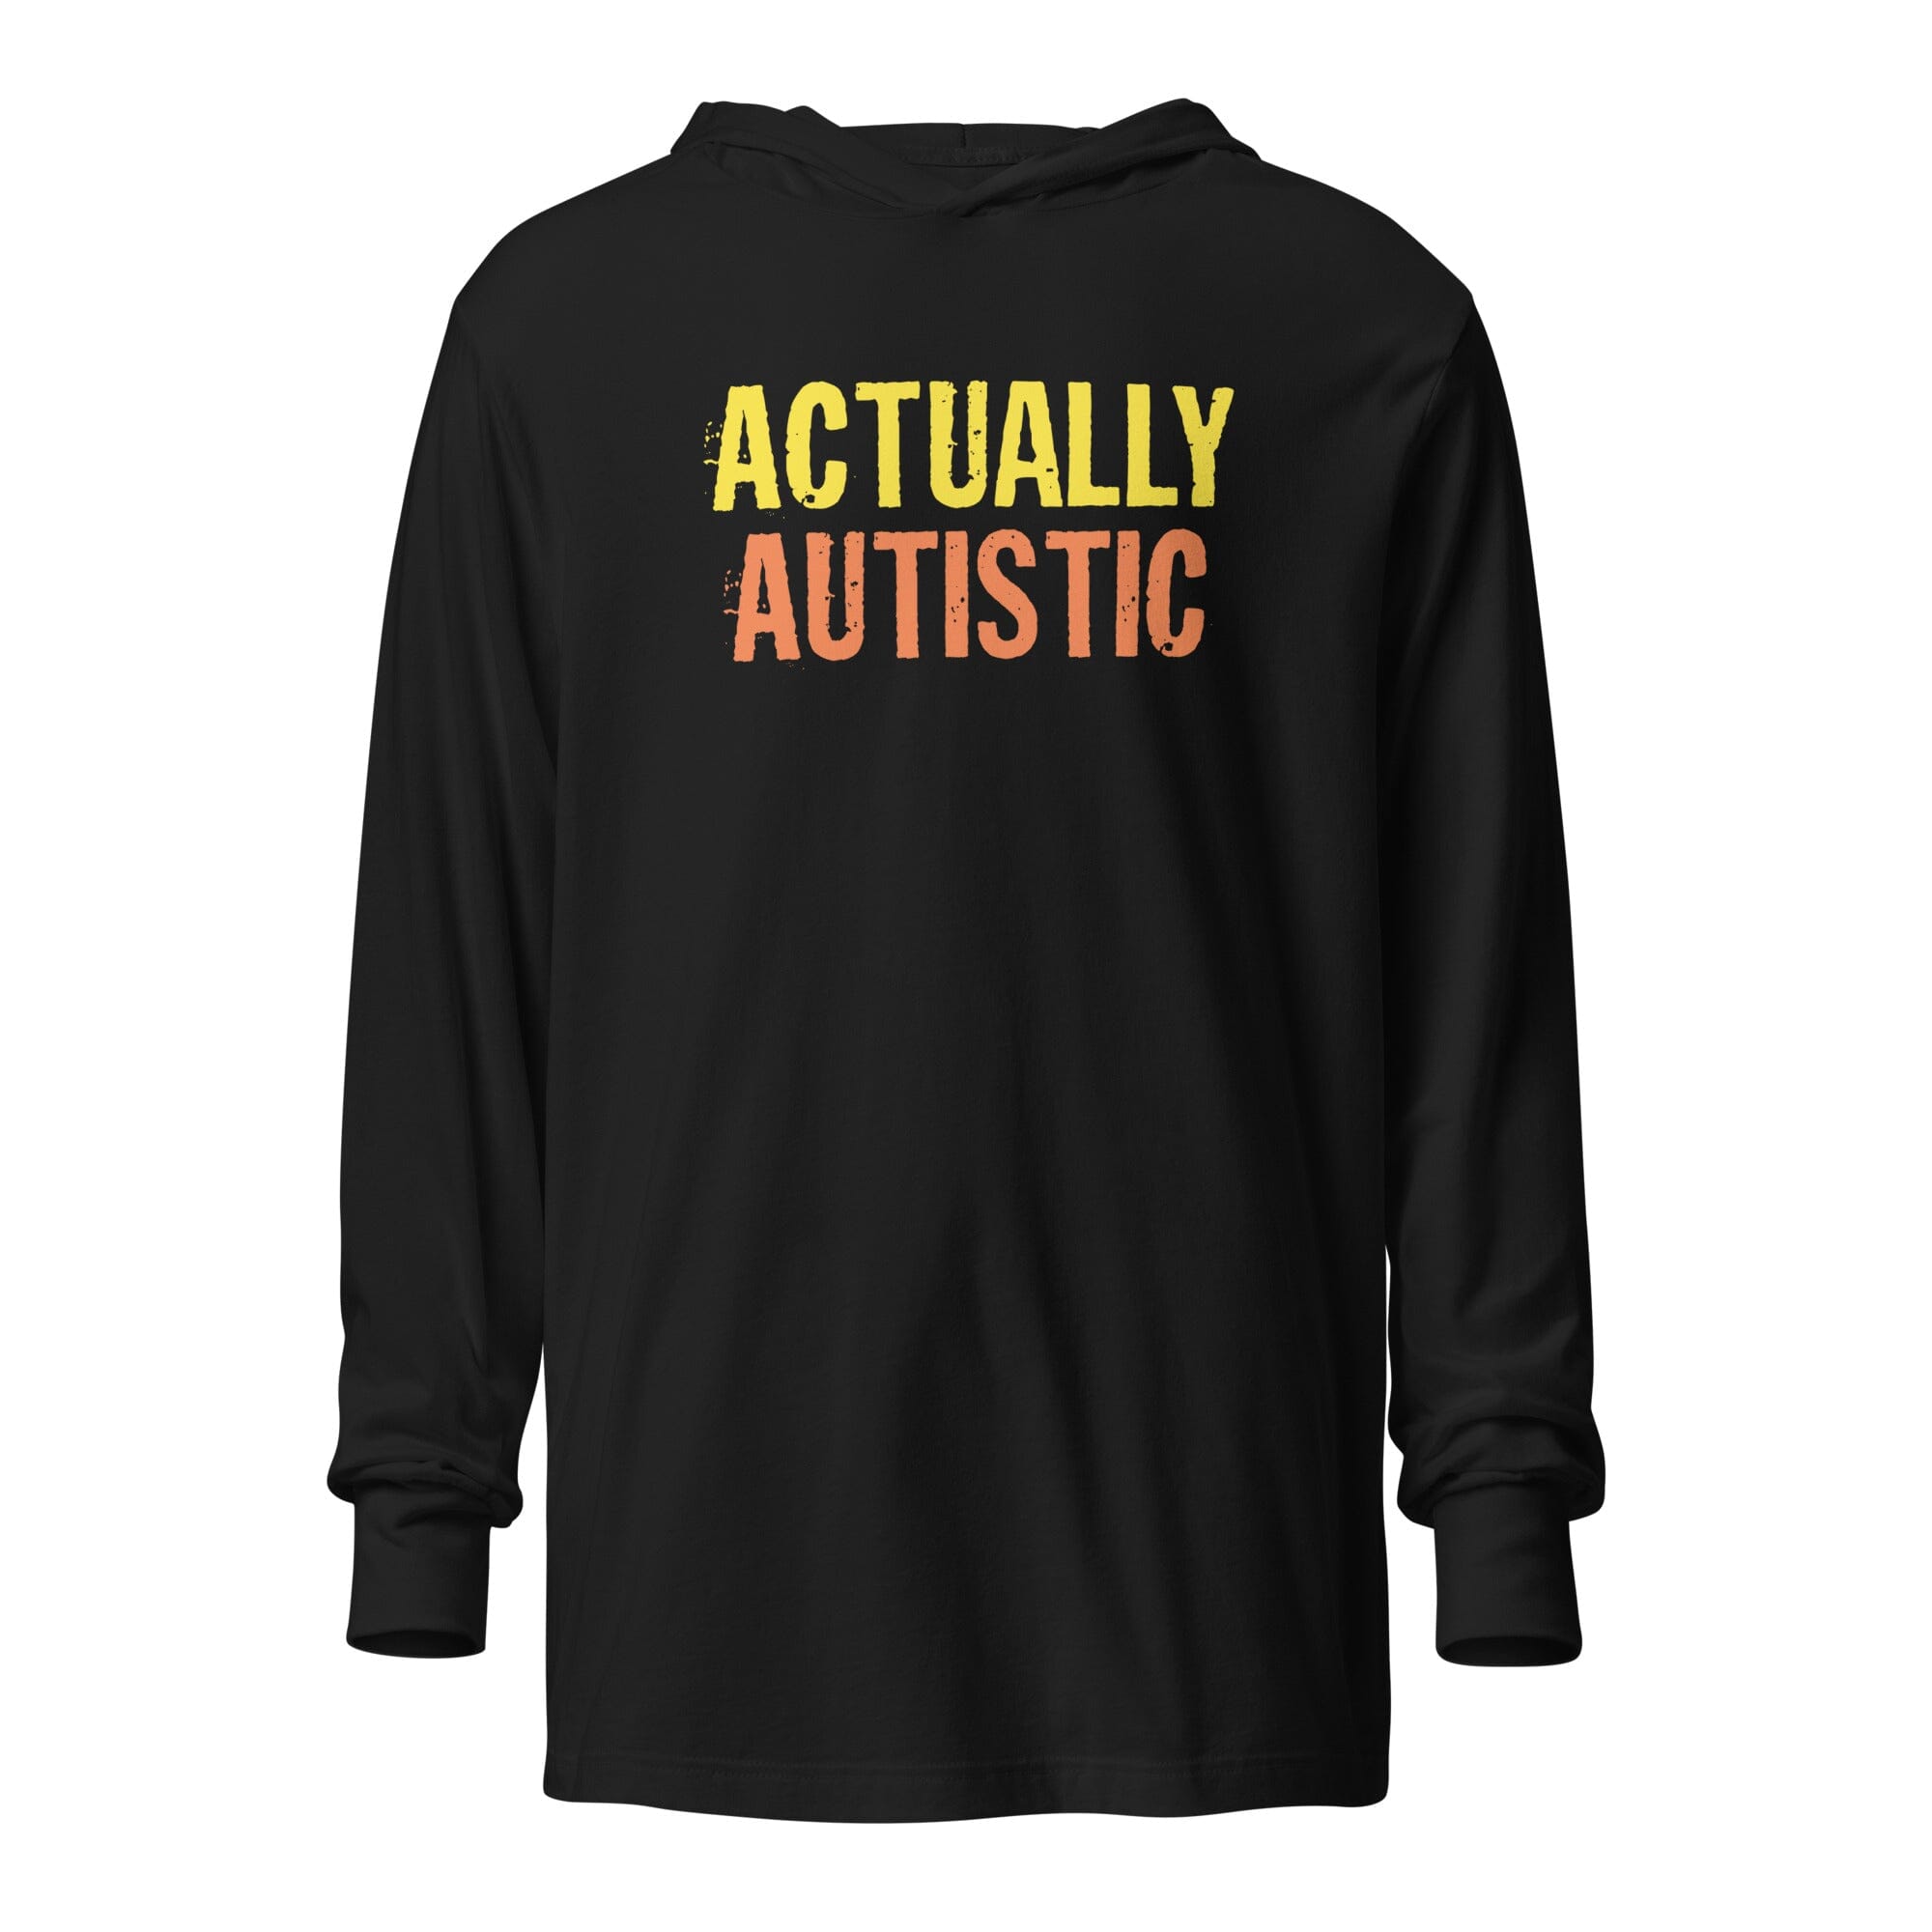 Actually Autistic Unisex Hooded long-sleeve tee The Autistic Innovator Black XS 